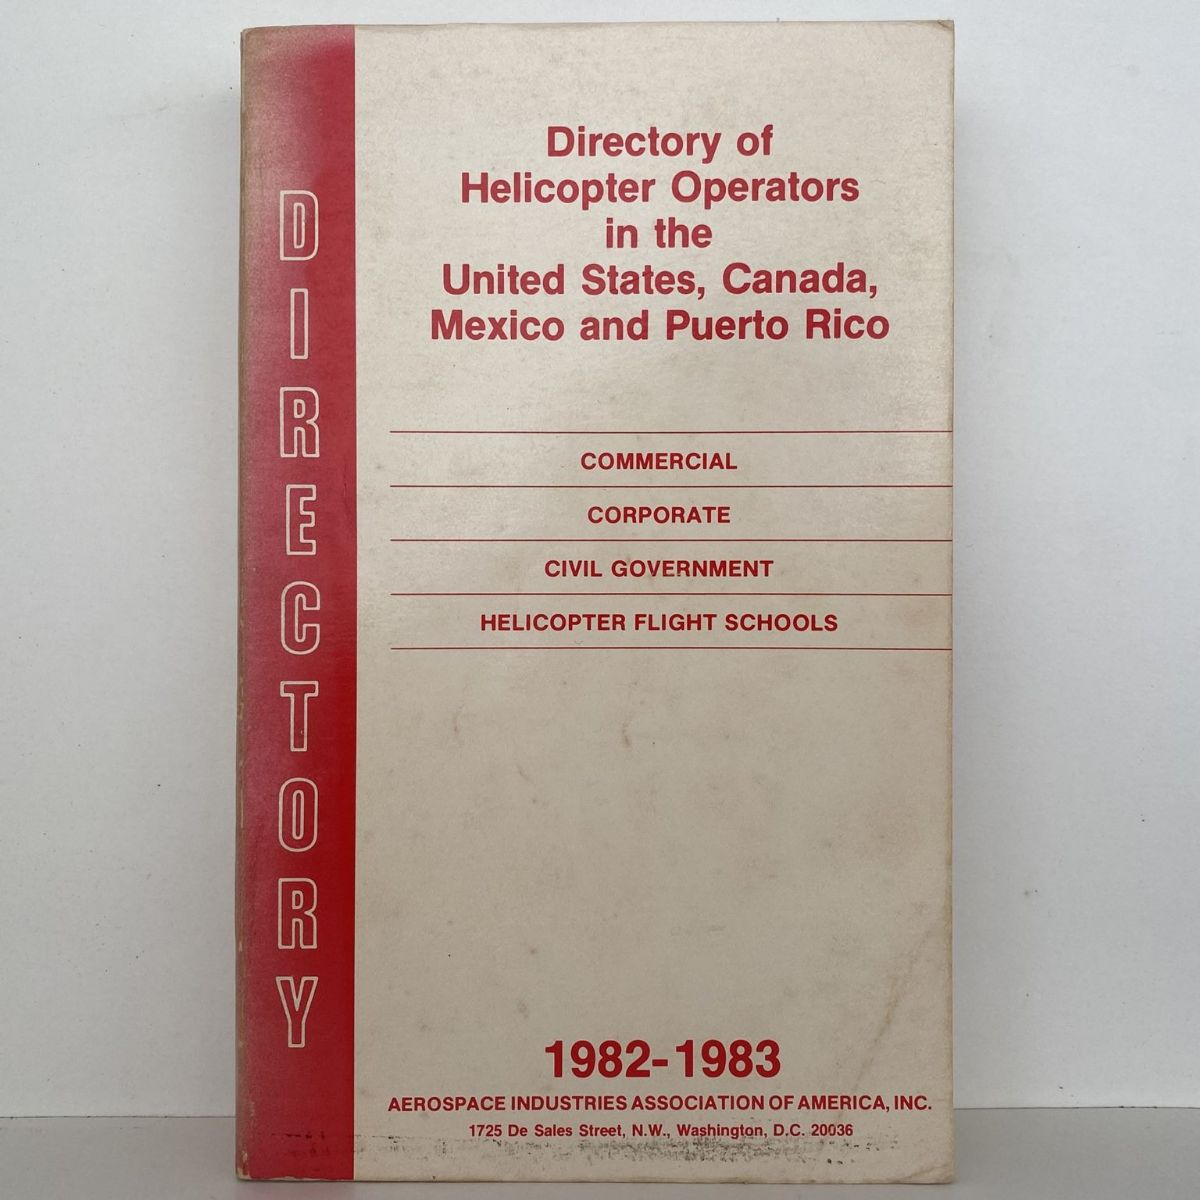 Directory of Helicopter Operators in the USA, Canada, Mexico, Puerto Rico 1982